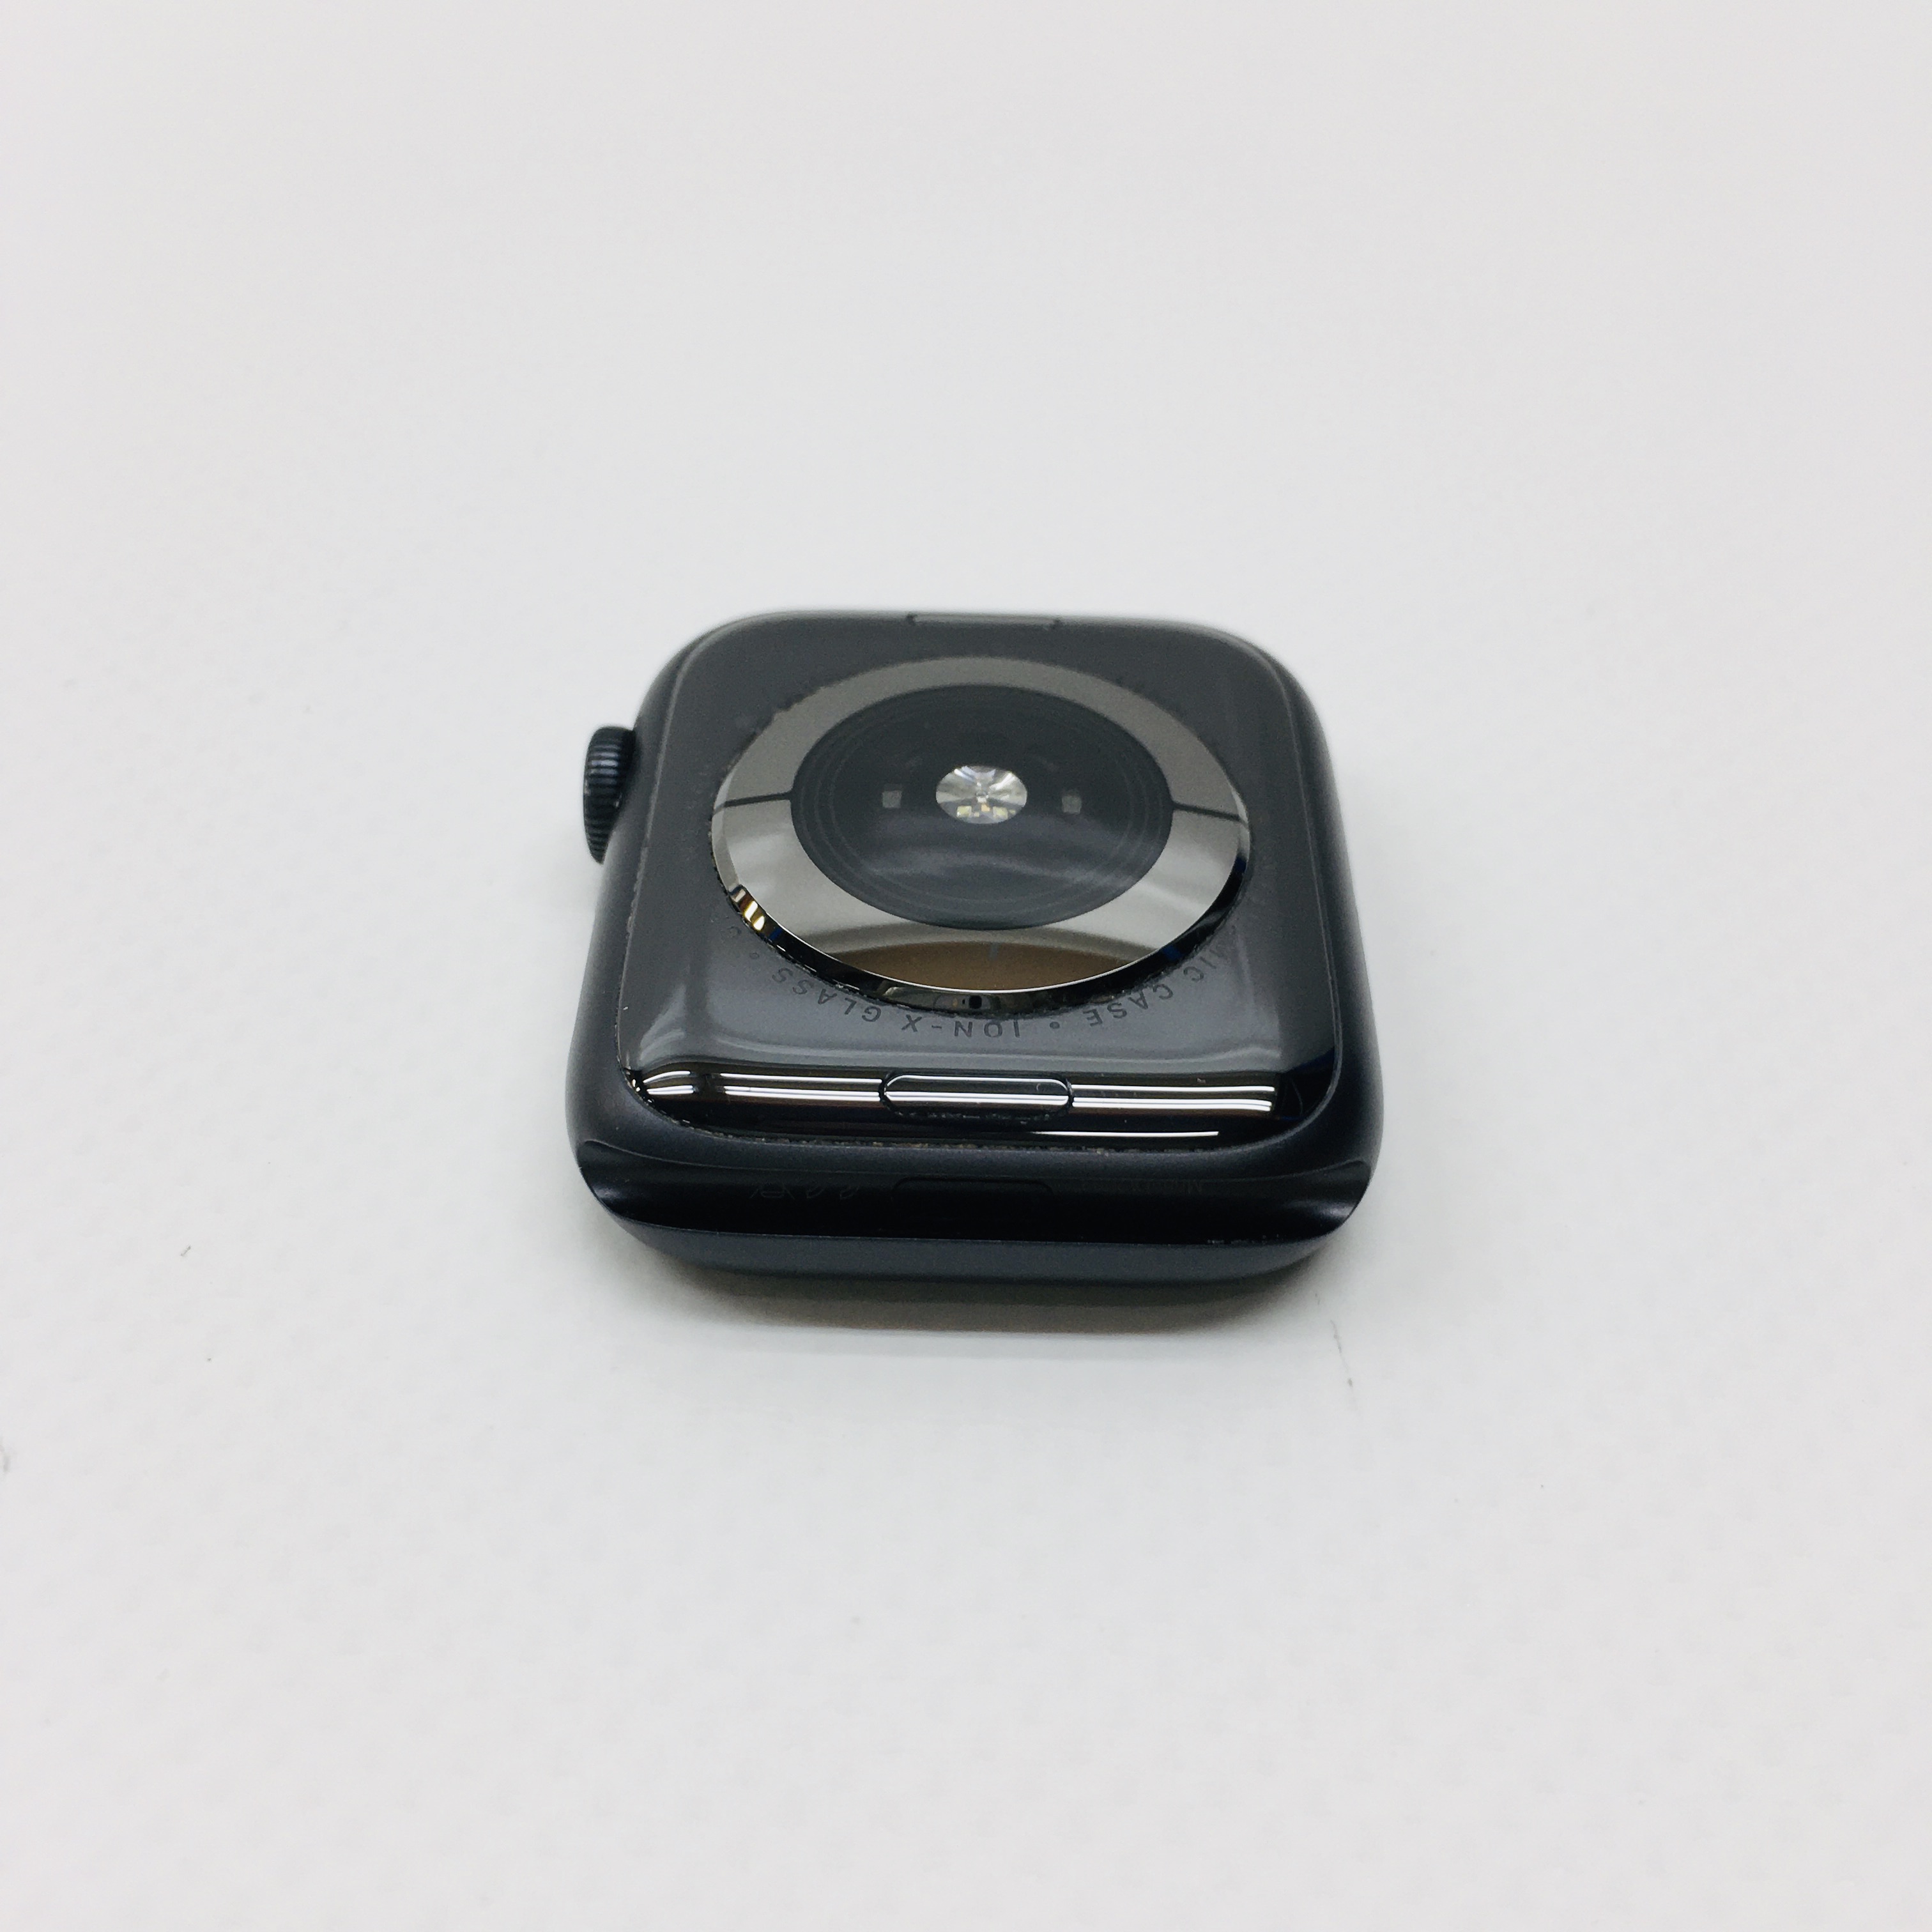 Watch Series 5 Aluminum (44mm), Space Gray, image 6